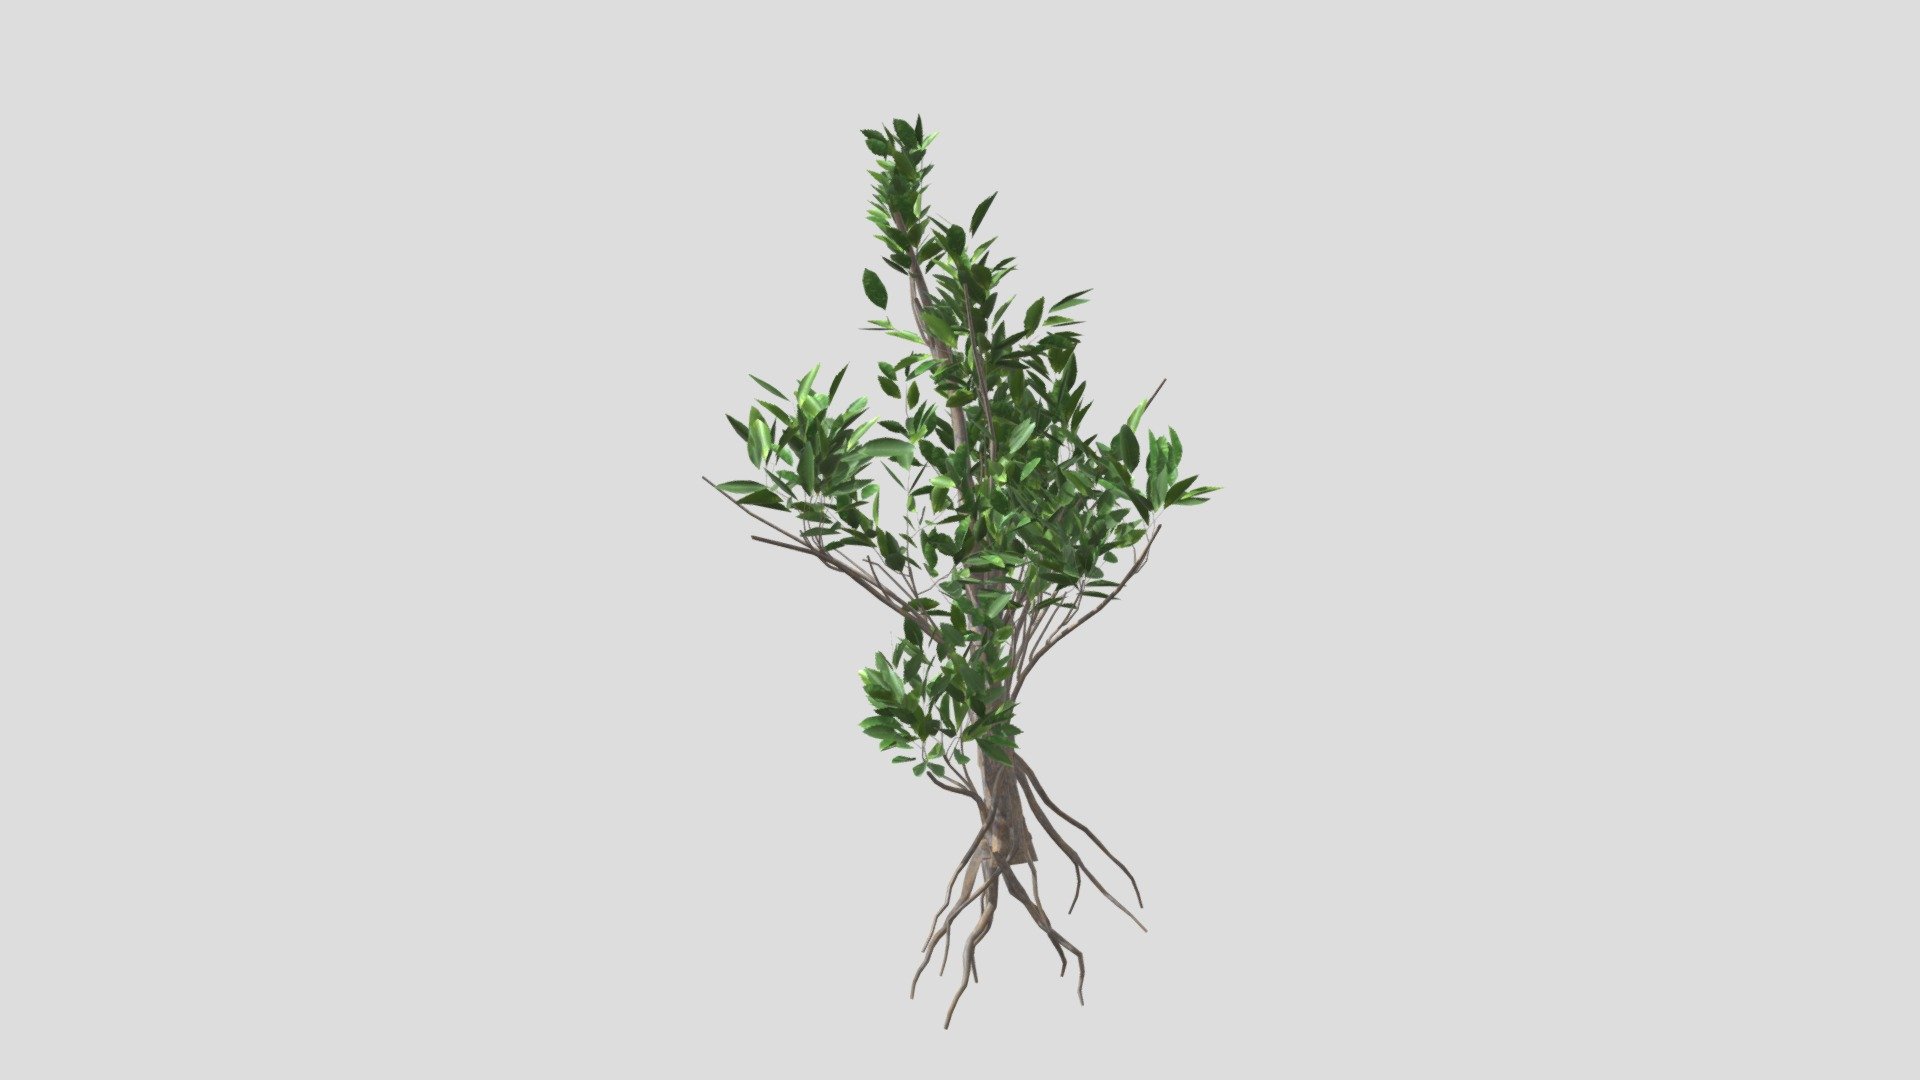 GOBOTREE

A high quality 3d model of a mangrove bush D (Rhizophora mangle).

| Model dimensions : 0.17m0.13m0.229m

| Mesh details â€“ 20356 faces , 15301 vertices

| It comes with PBR ready textures - Diffuse, Albedo, AO, Metalness /Specular, Normal, Roughness maps. Other formats available upon request.

| Formats 3ds max 2015 with a Vray materials FBX OBJ

Object suitable for architectural and landscape visualisations and presentations. Please let us know, if we can improve our models or if you need us to adapt to specific needs!

We take custom orders for specific species!

Find more assets on Gobotree.com! - GTV mangrove bush D - Buy Royalty Free 3D model by Gobotree-3D-Assets 3d model